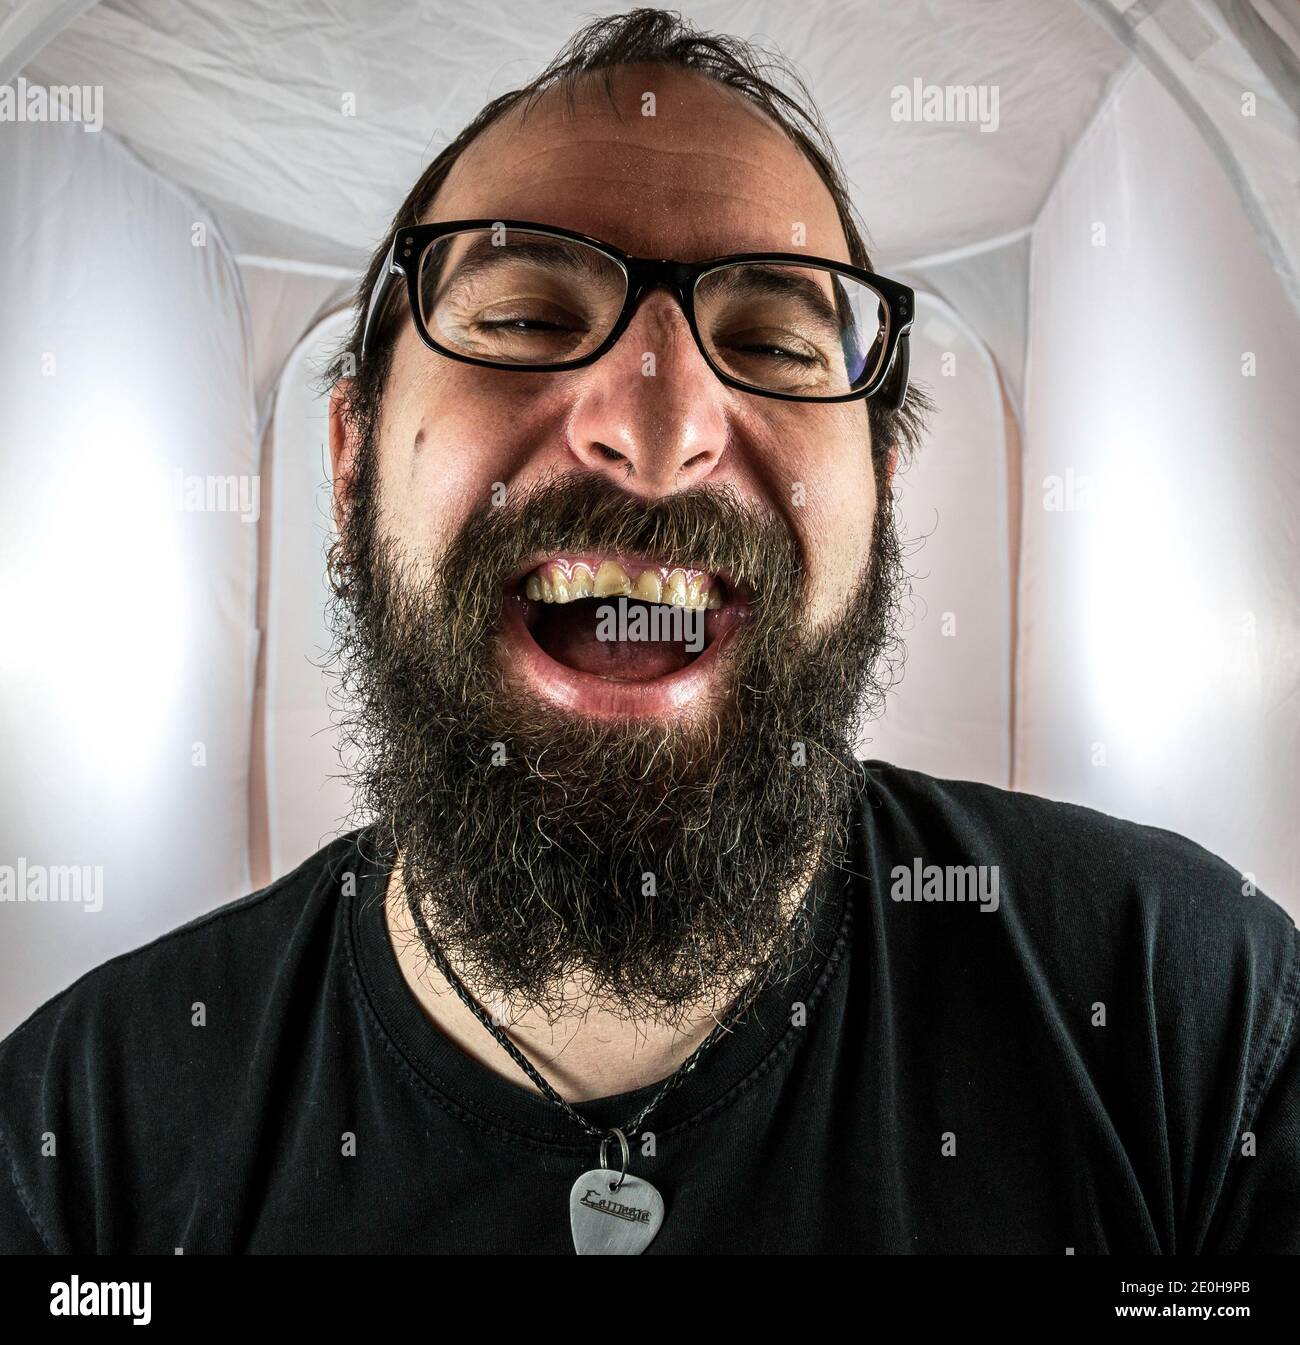 A bearded gleeful and gloating man in a good mood with black glasses Stock Photo